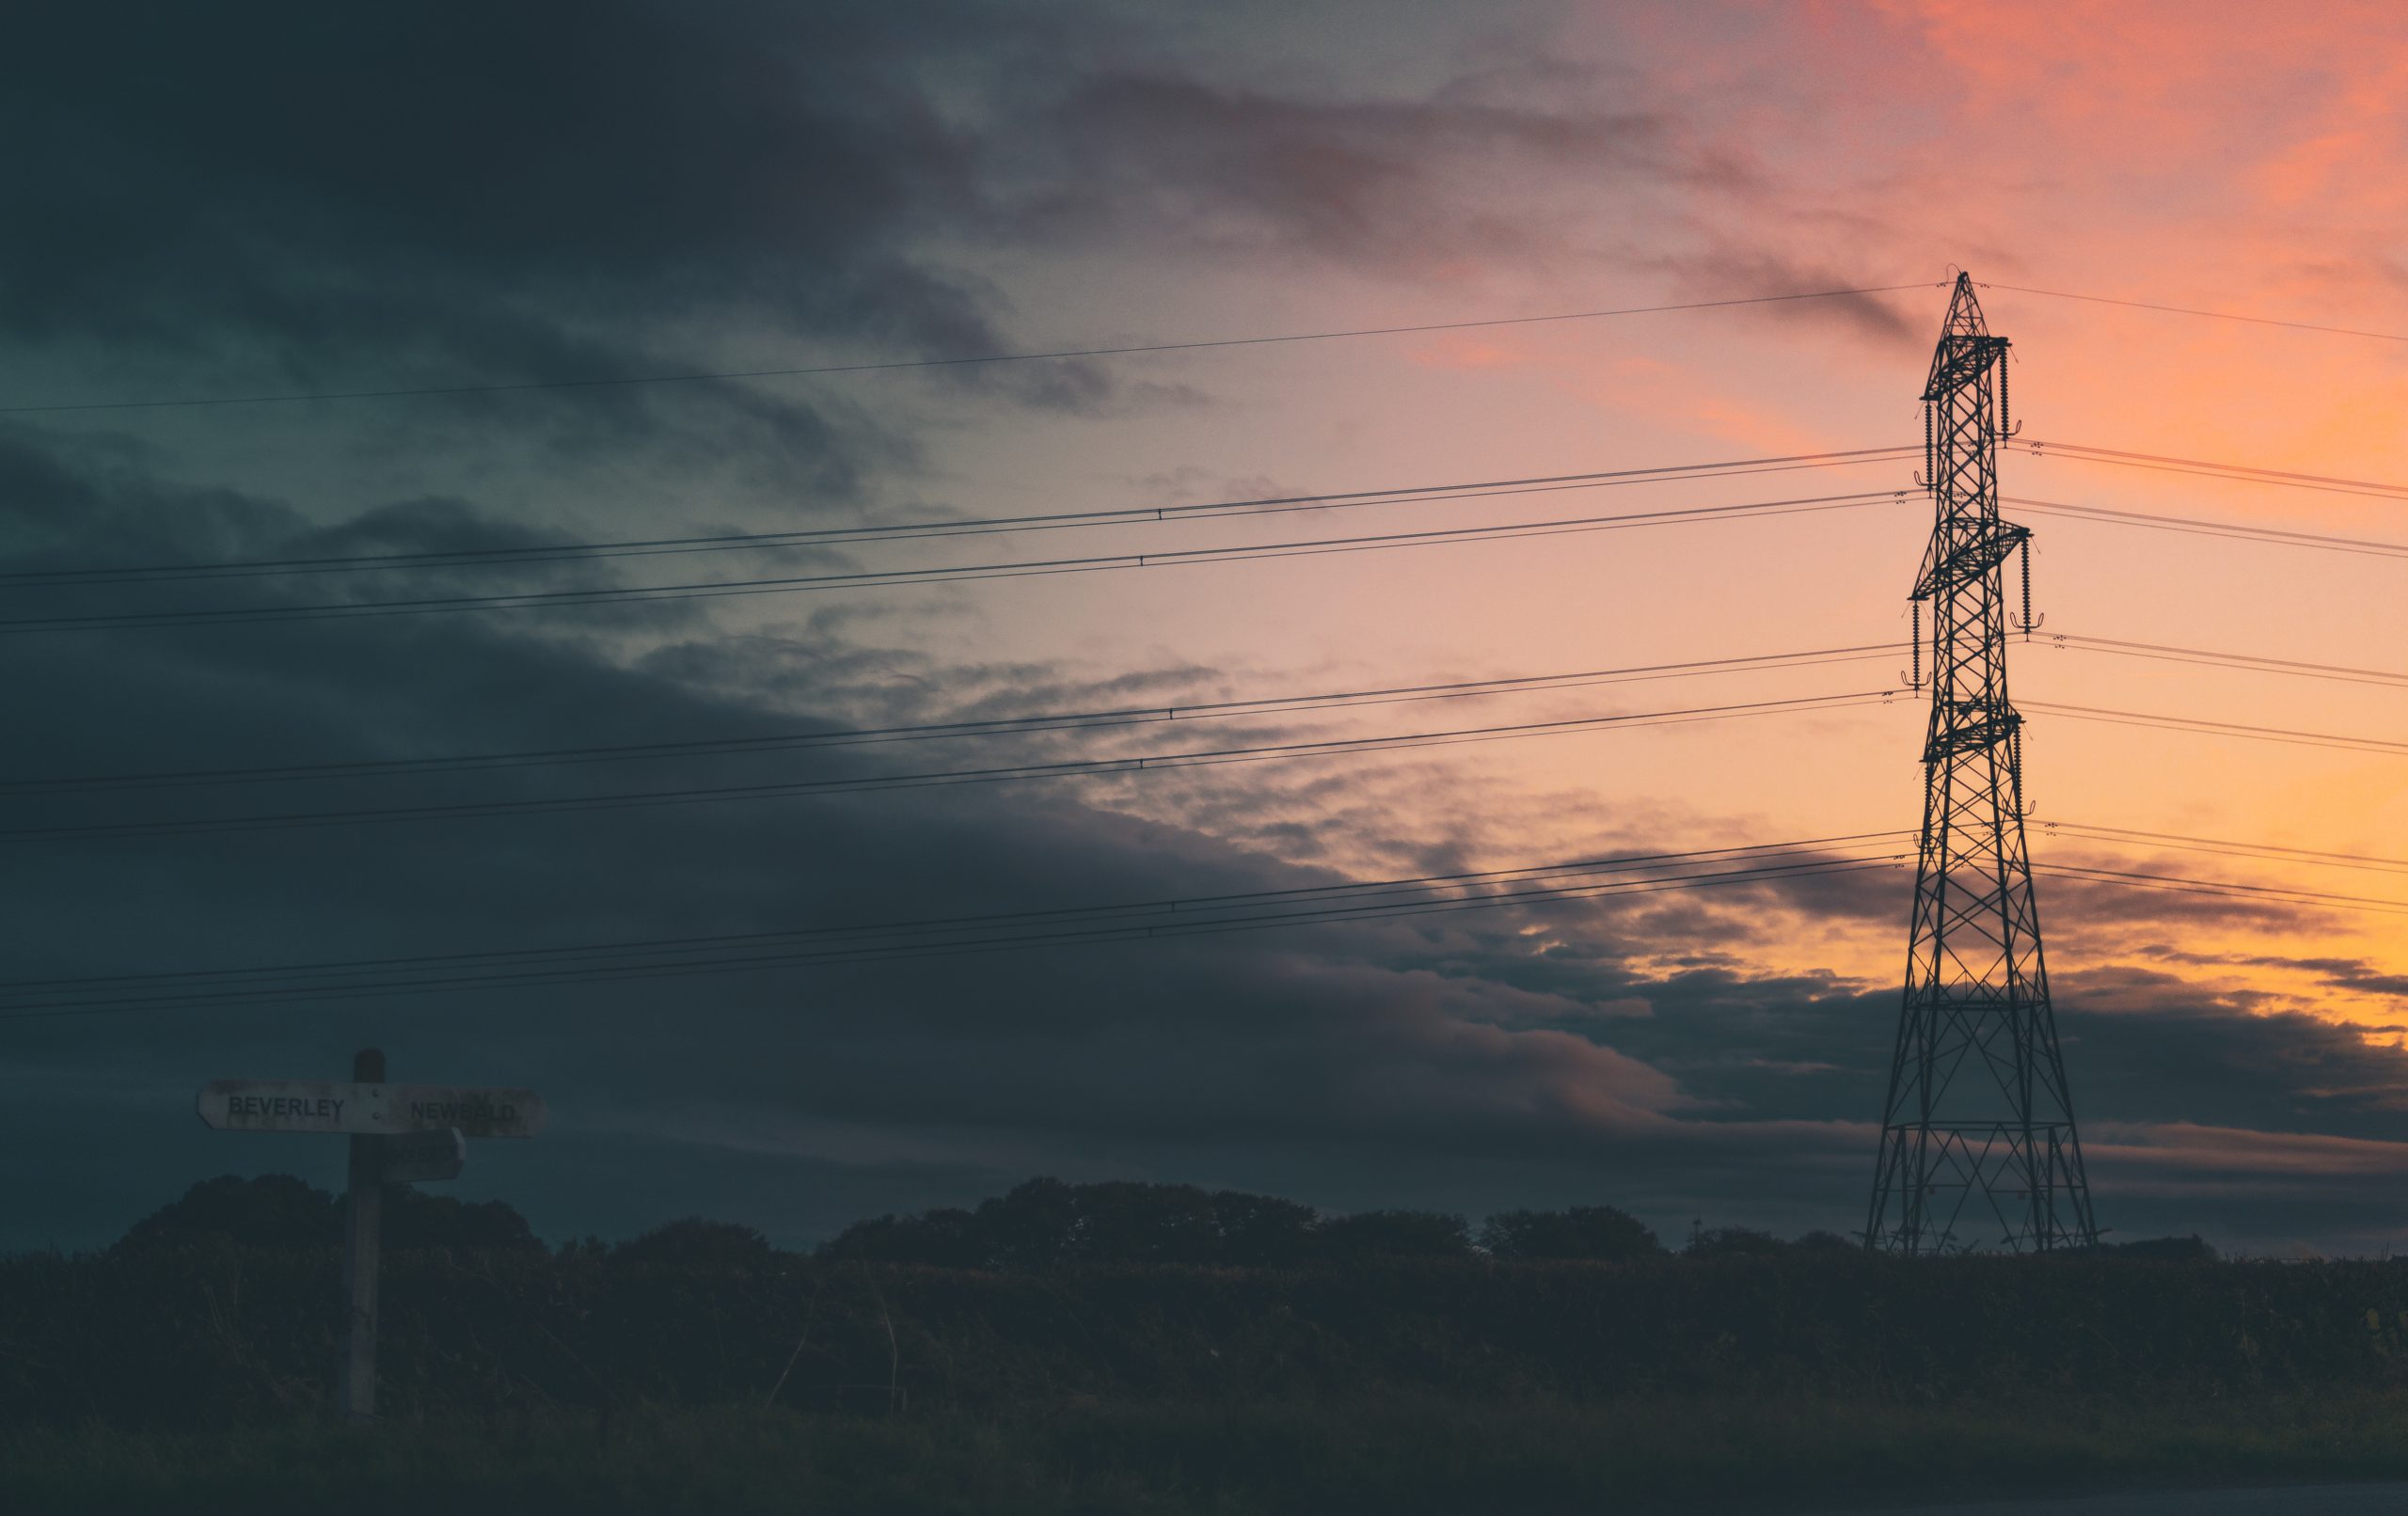 Silhouette of a transmission Tower - Power Pylon - Against a bright orange sunset